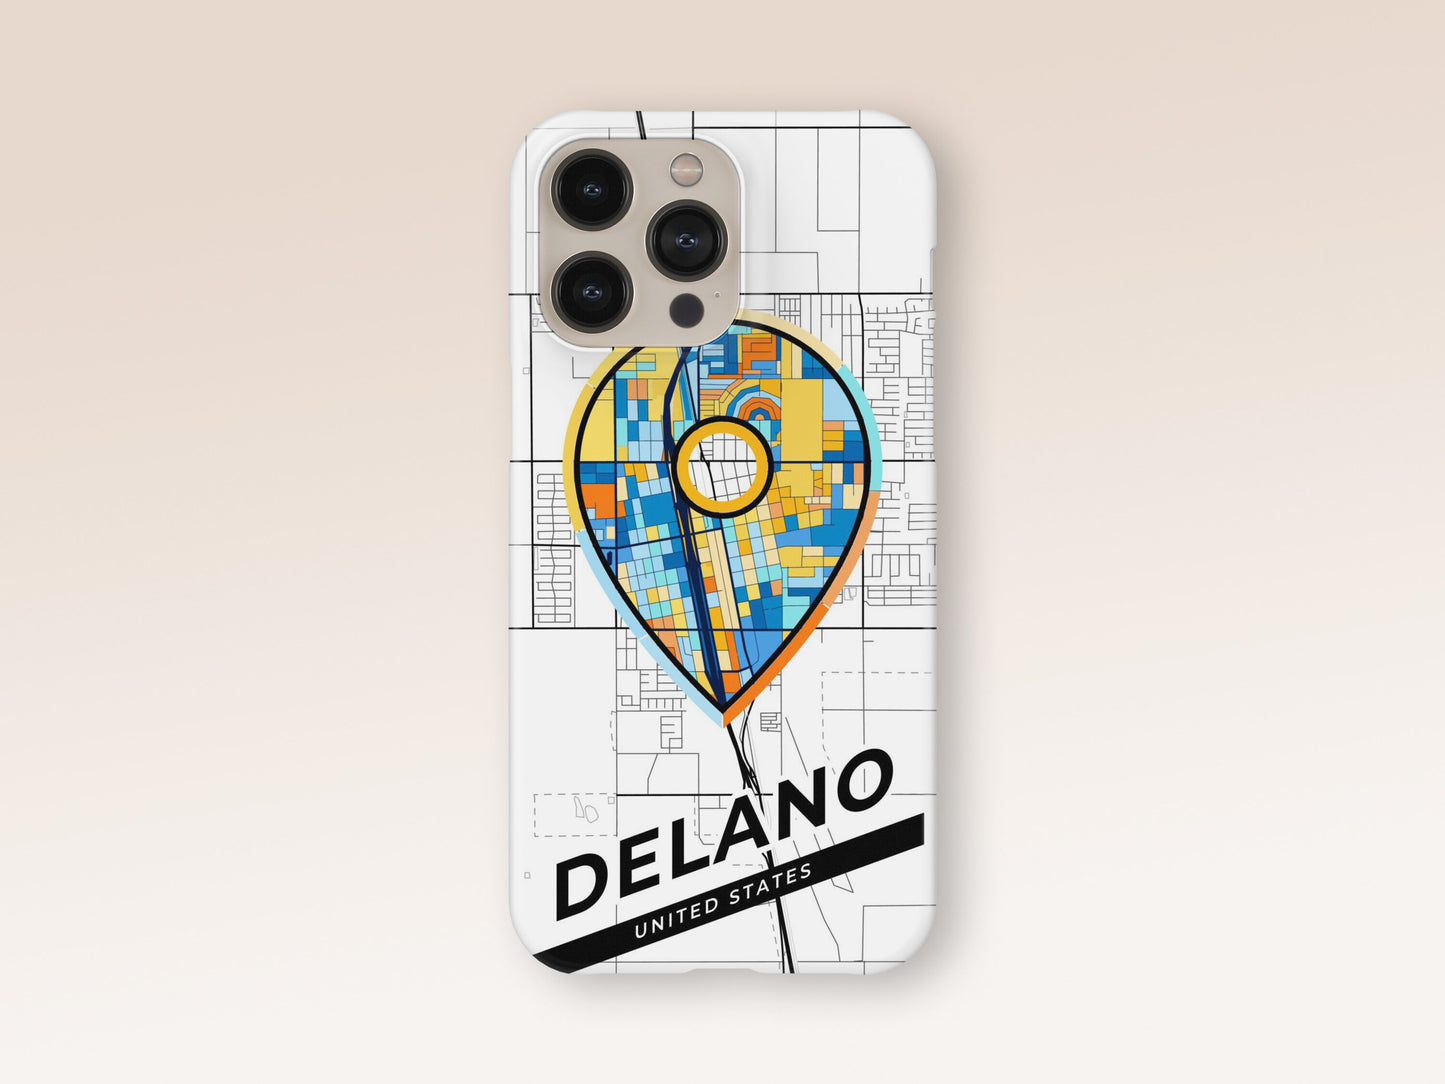 Delano California slim phone case with colorful icon. Birthday, wedding or housewarming gift. Couple match cases. 1